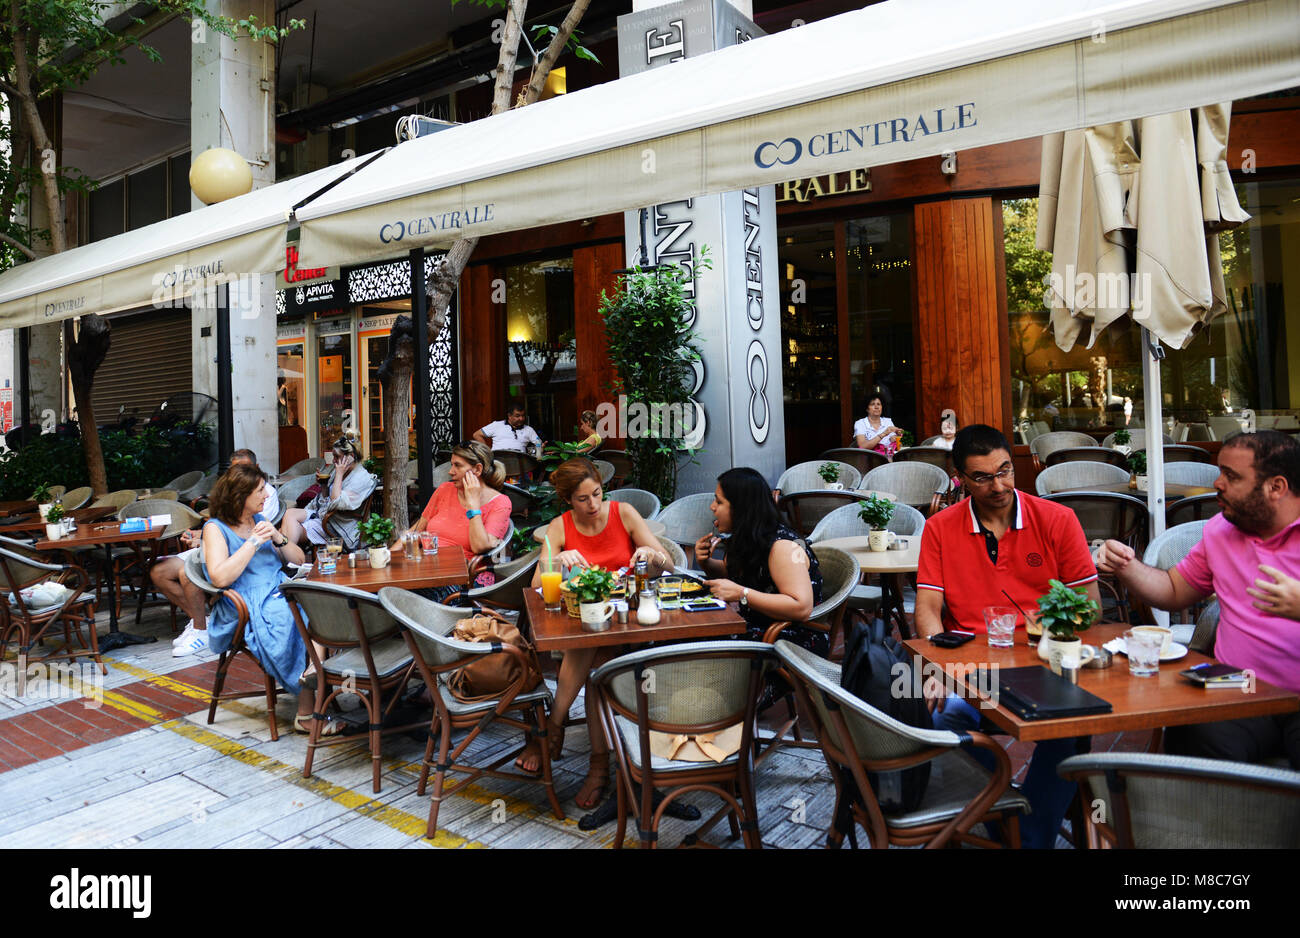 Greeks love socializing in local cafes. Stock Photo